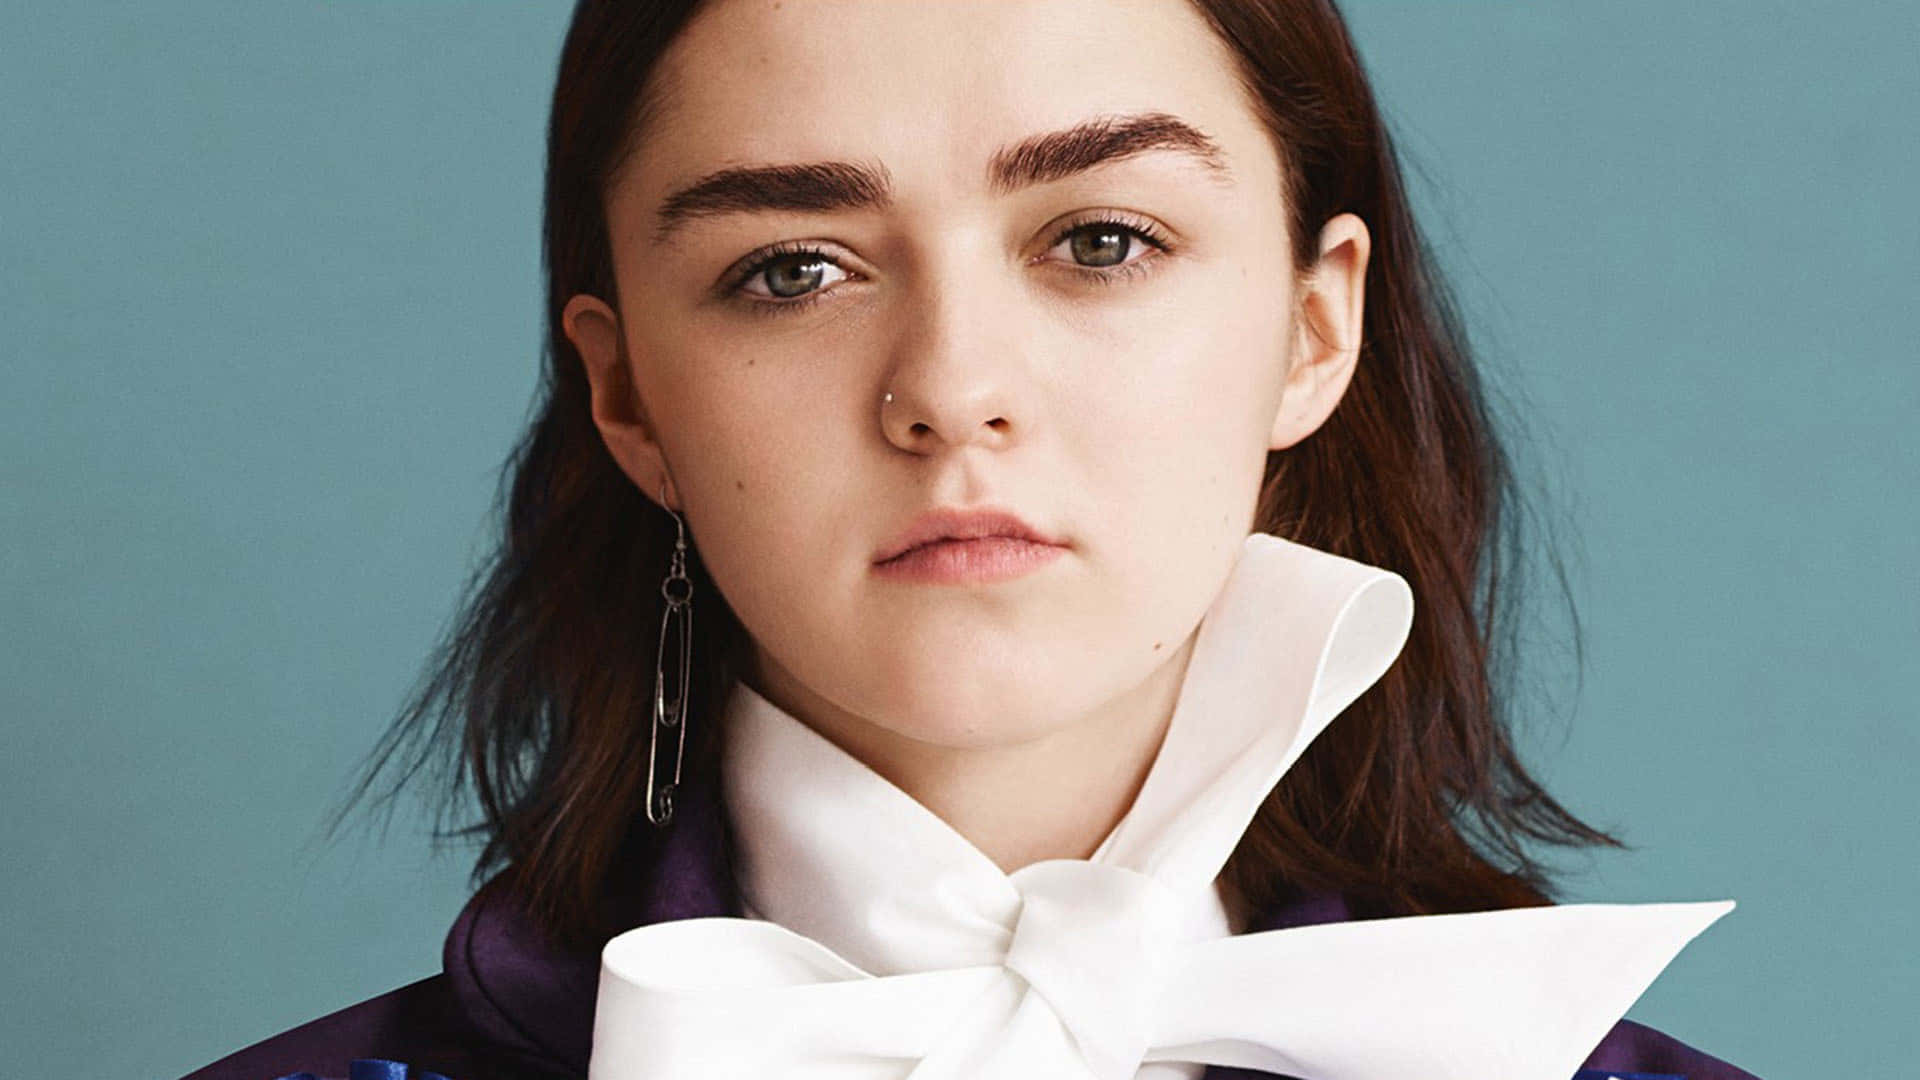 Actress Maisie Williams Posing With A Brilliant Smile Wallpaper